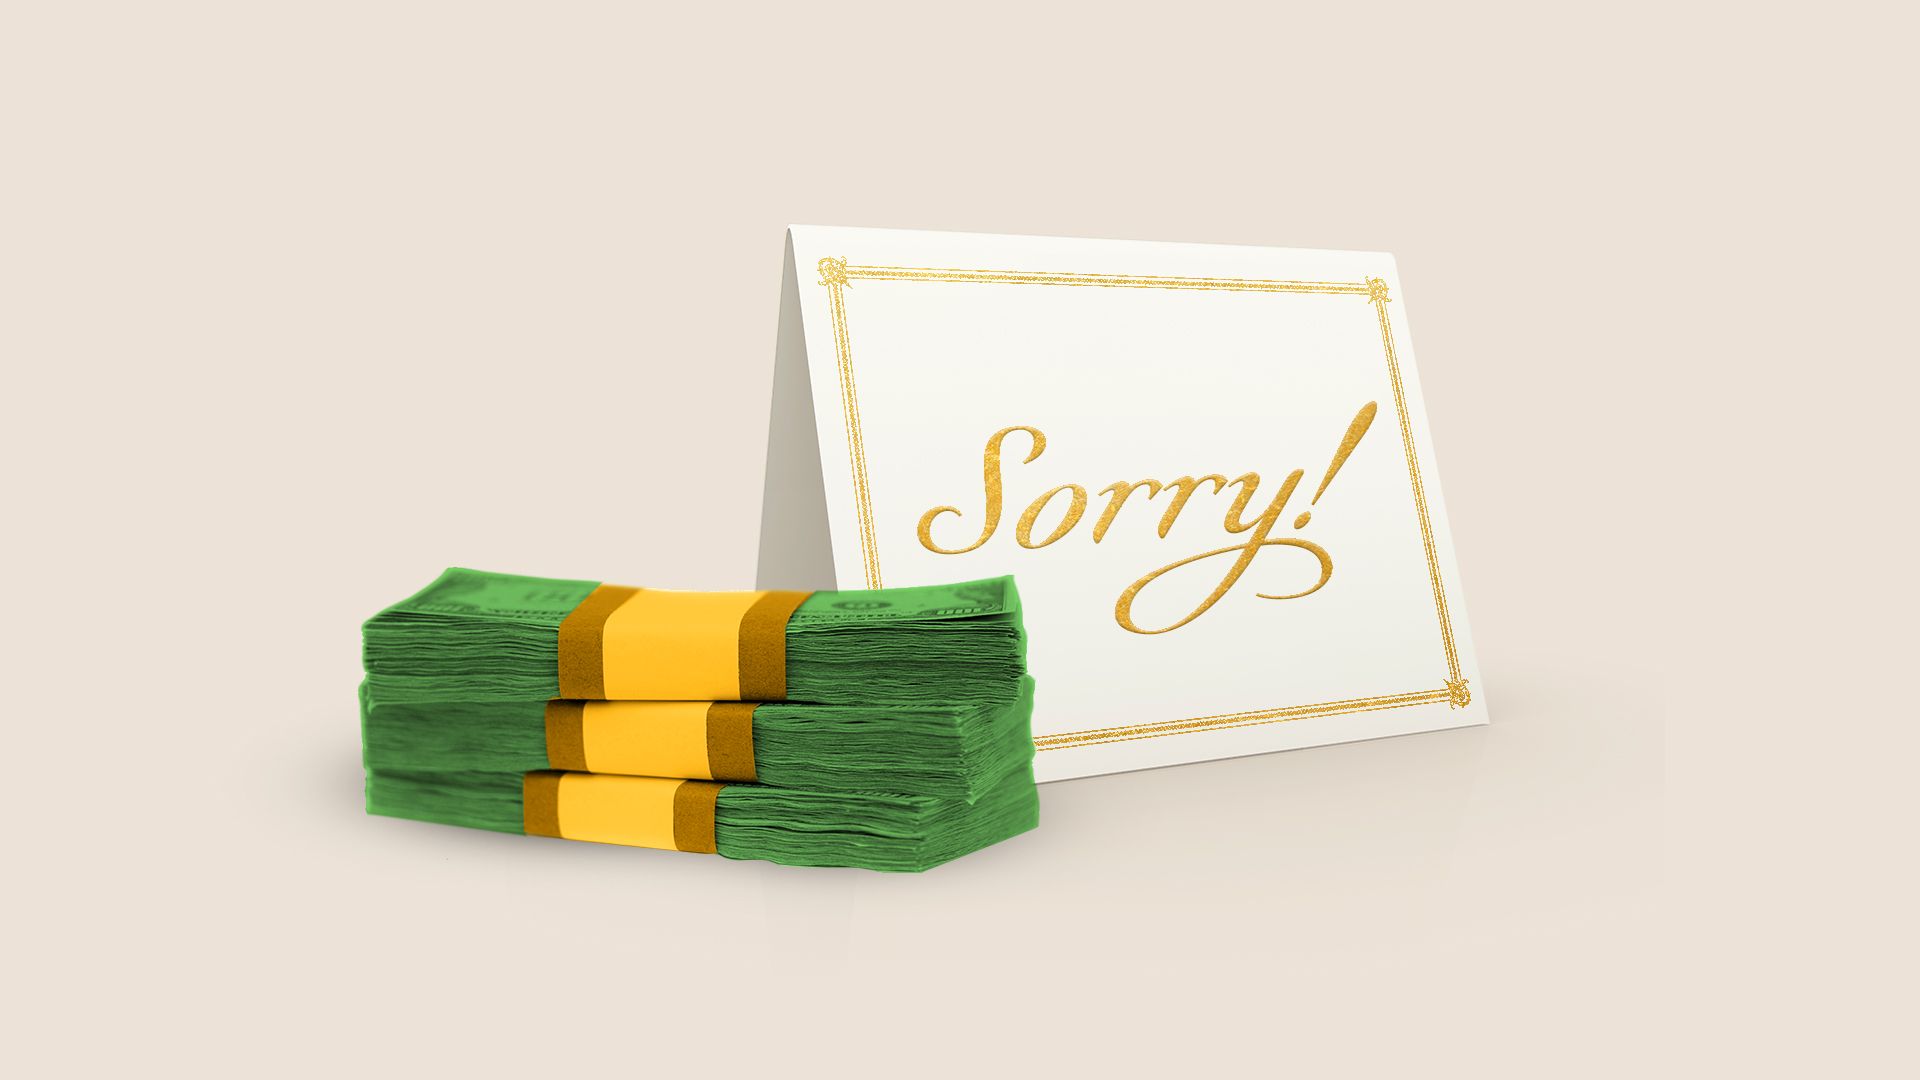 Illustration of a greeting card that says "Sorry!" next to a stack of cash. 